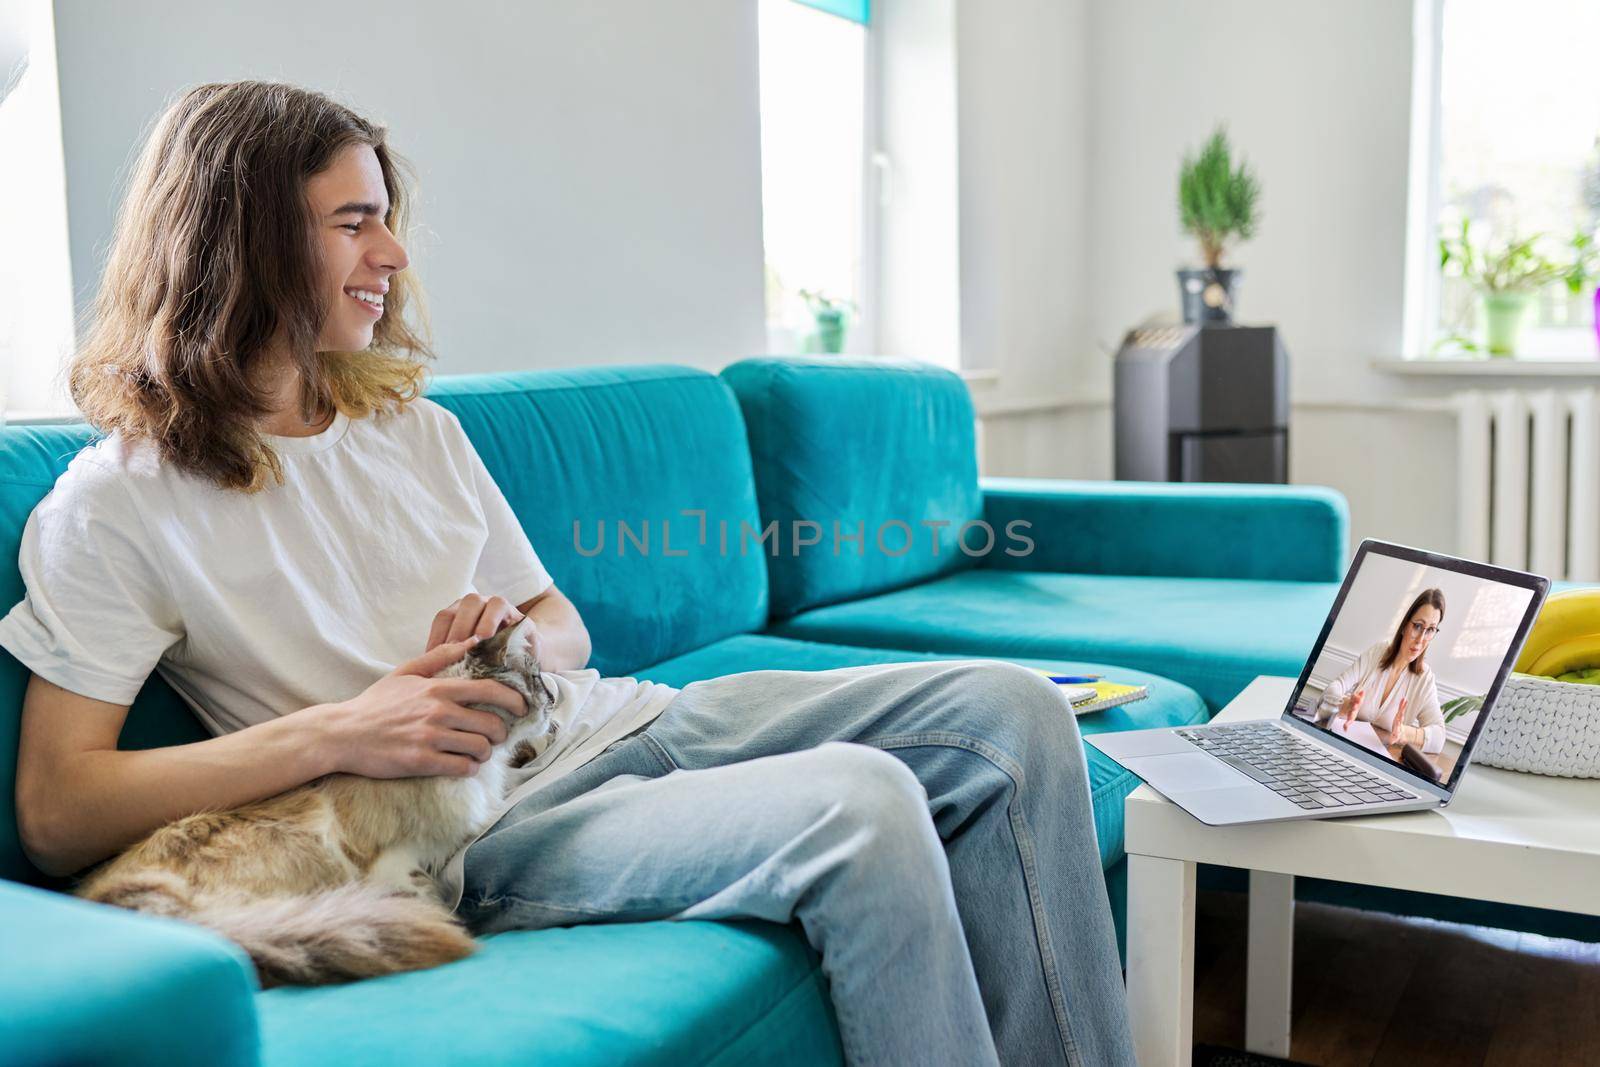 Guy talking online with teacher, psychologist, social worker. Teenager sitting at home with pet cat, using video call on laptop, virtual meeting with counselor. Technology, adolescence, mental health